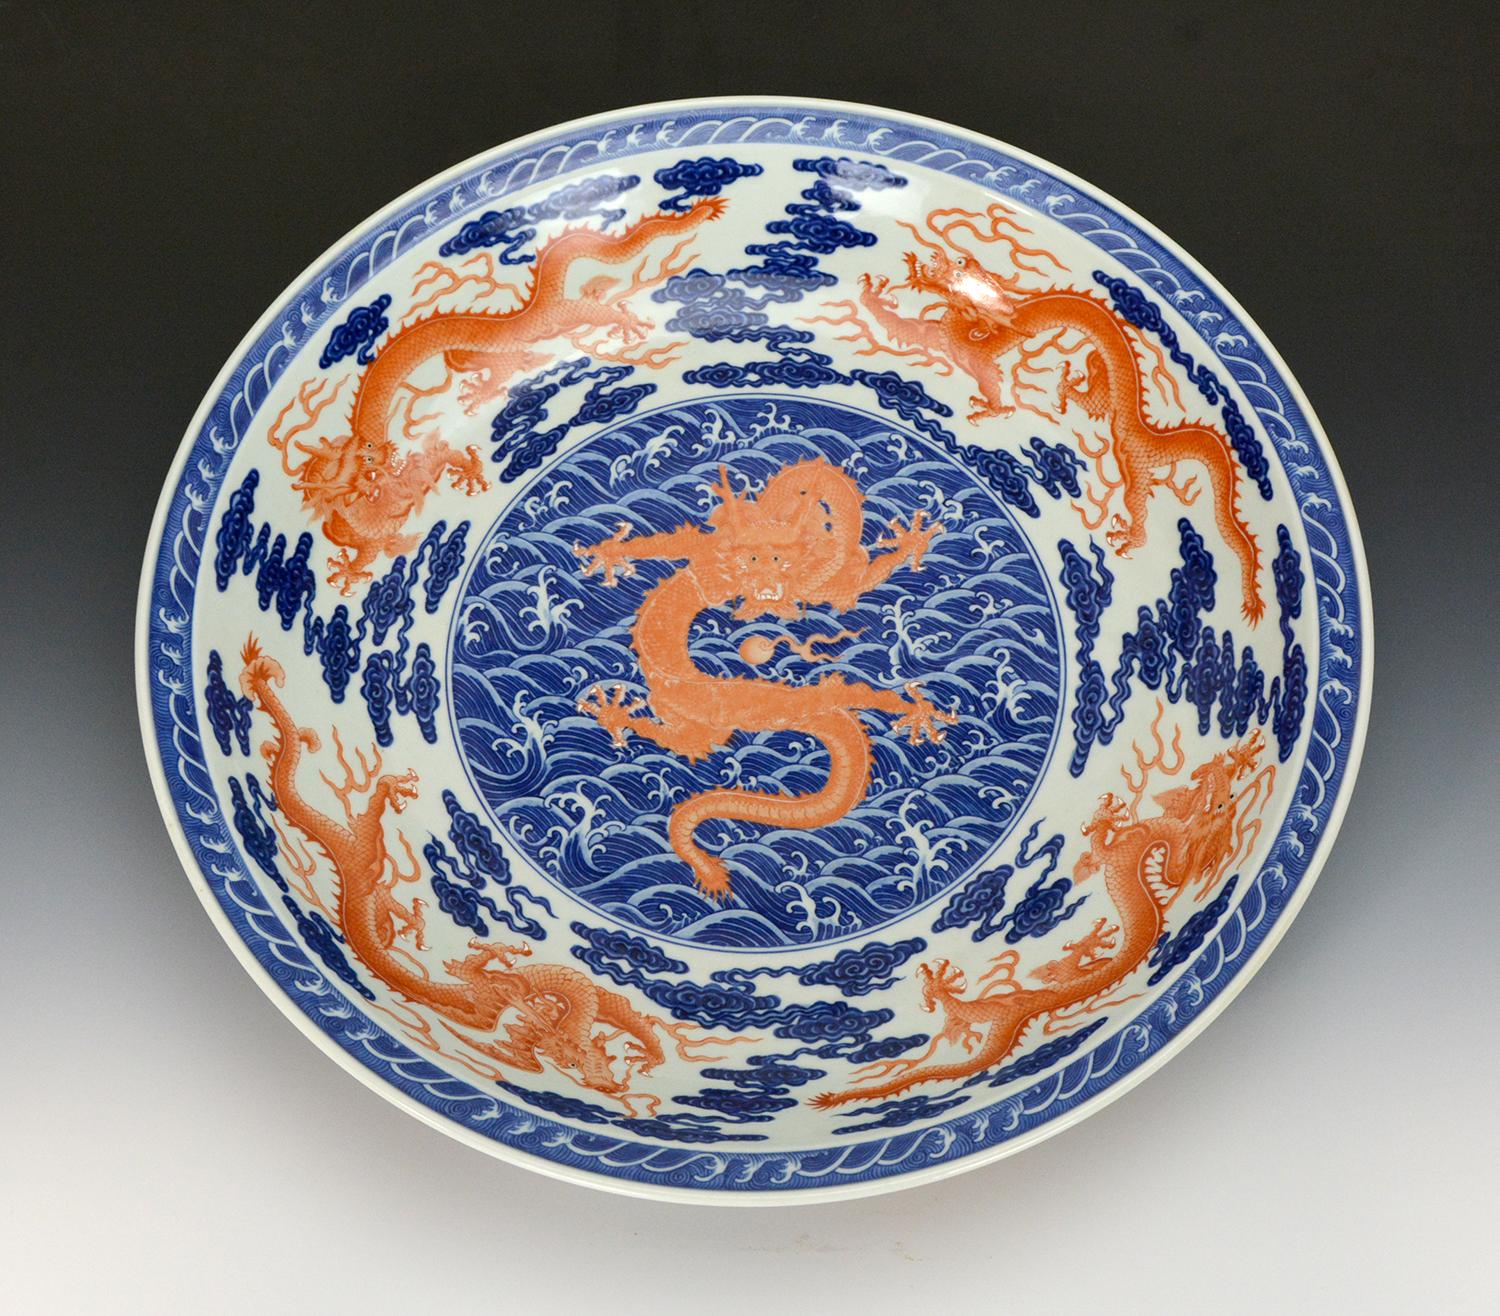 A beautifully hand painted Chinese blue and white charger plate in the highest standard and style of Qing Qianlong period. A large medallion in the center, formed with blue ocean waves. Above a the waves, an outstanding forward facing coral red